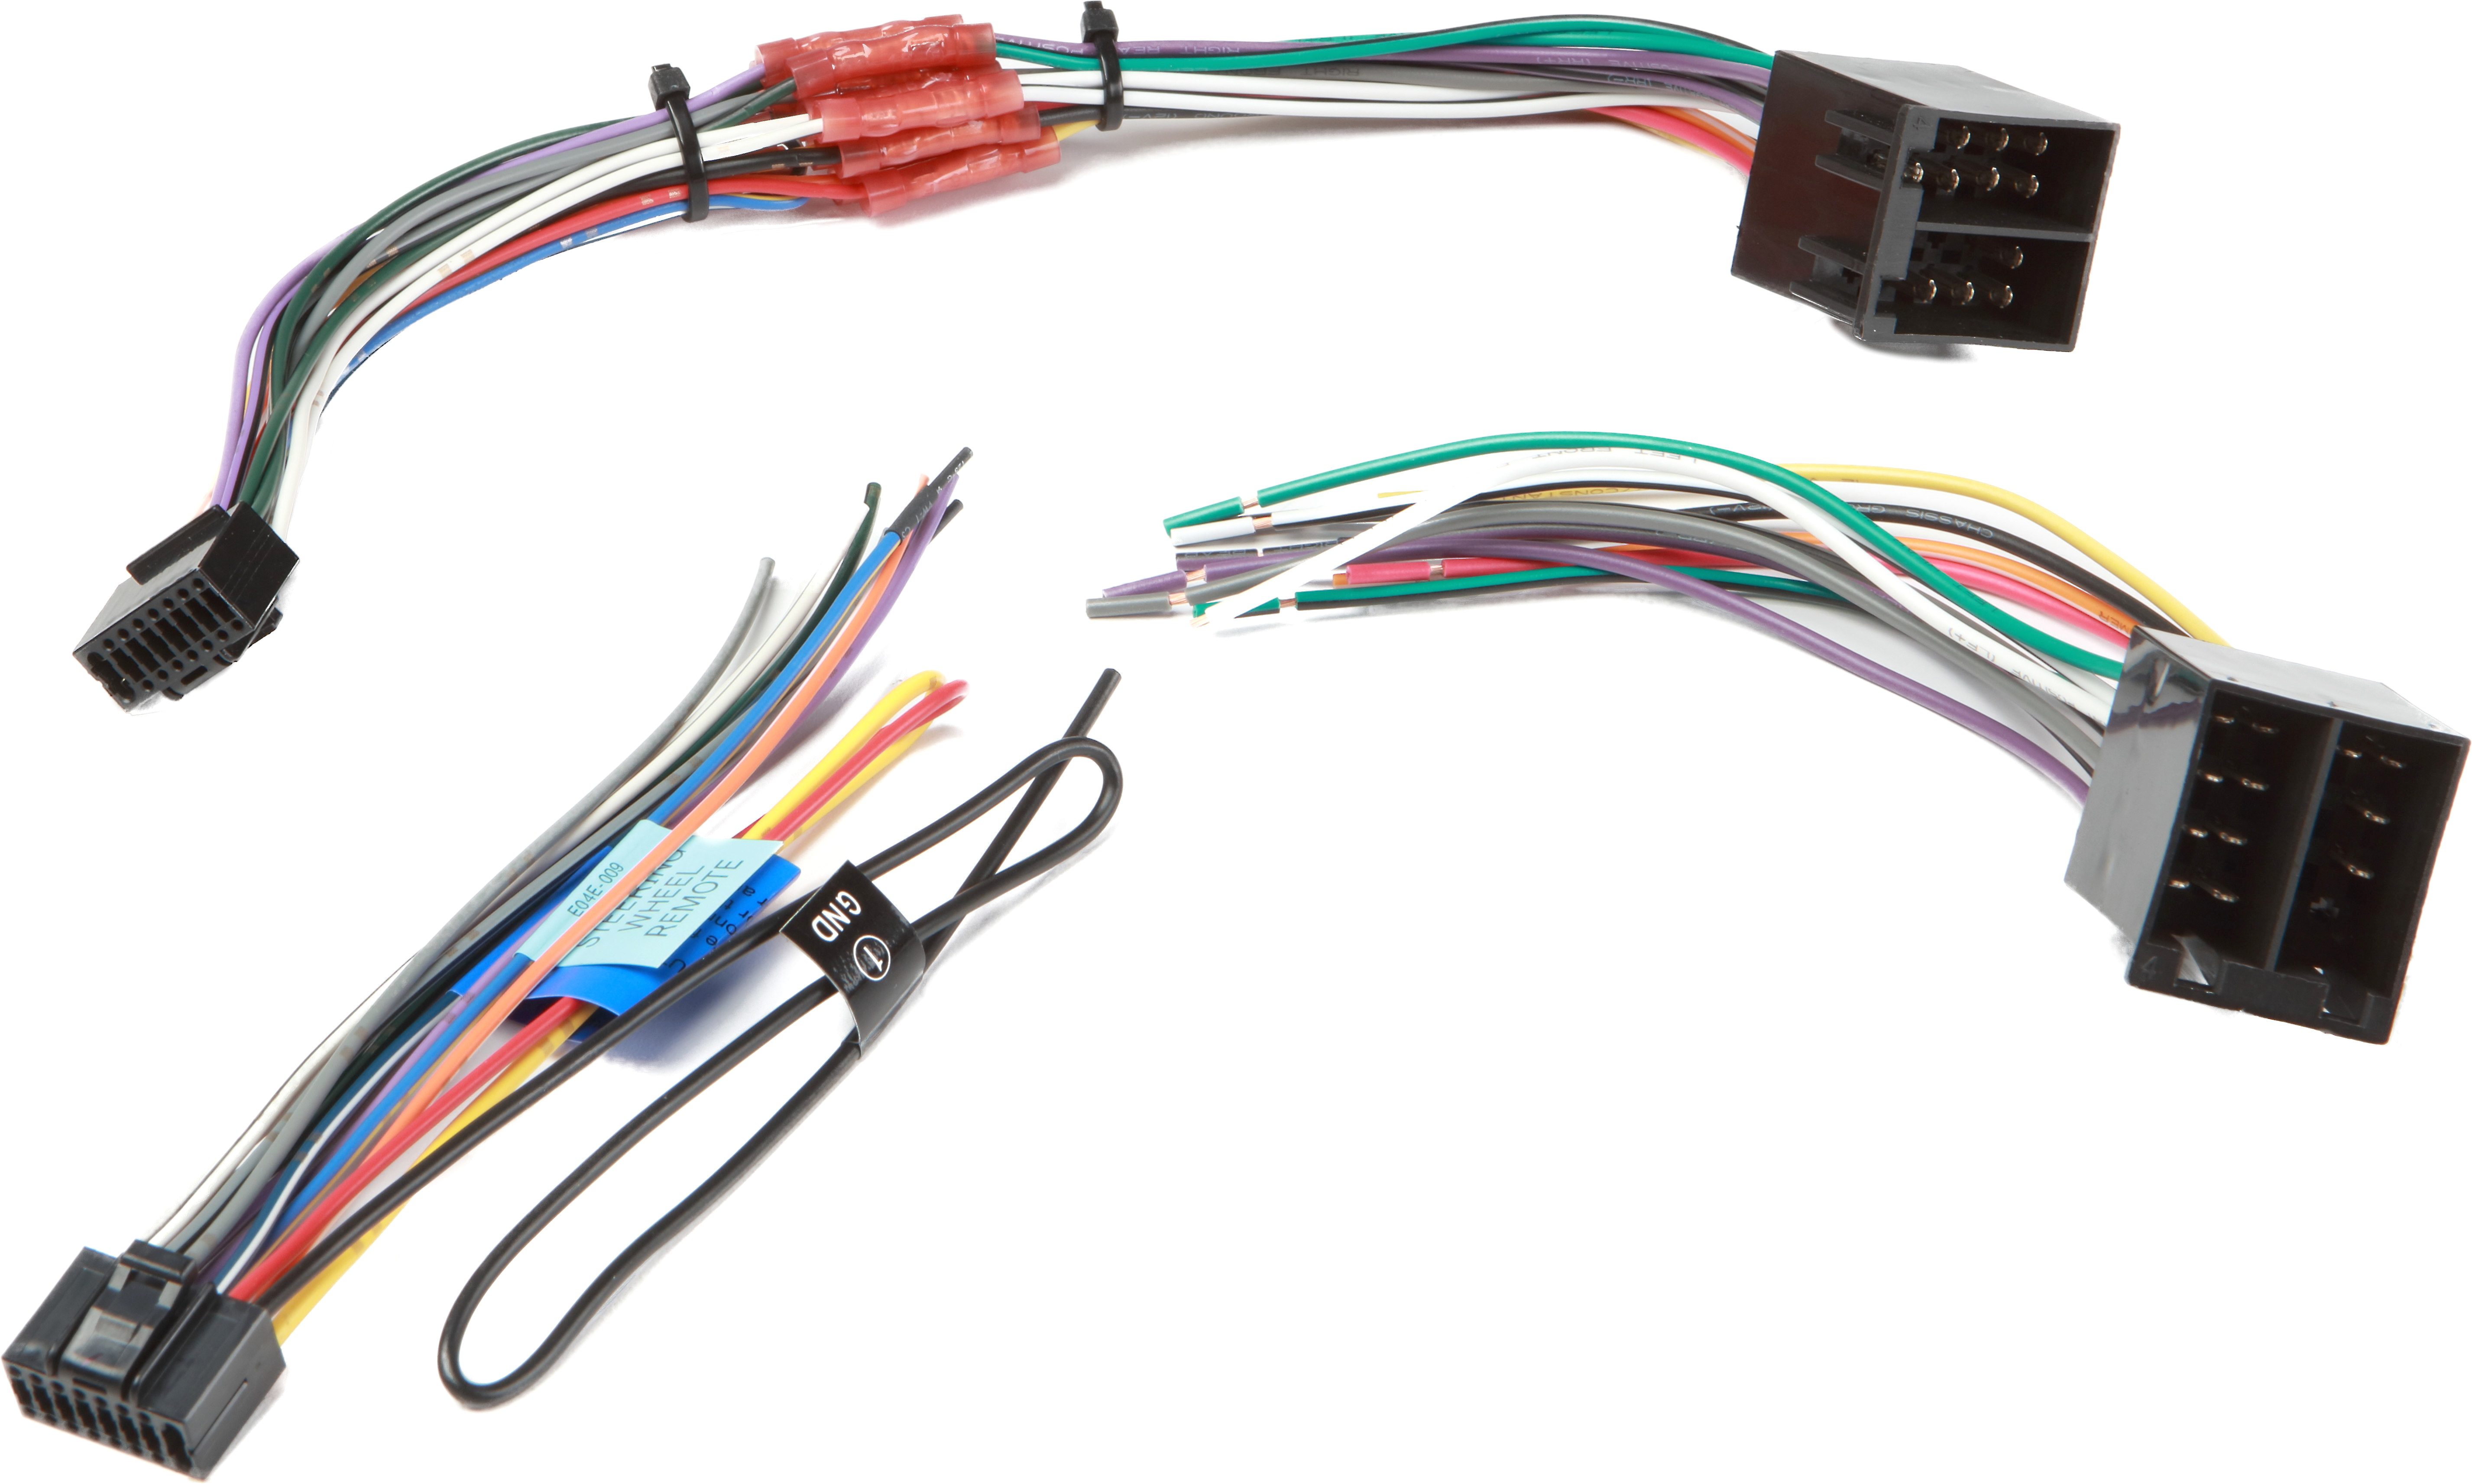 crutchfield readyharnessa service let us connect your new radio s wiring to the wiring harness for your vehicle at crutchfield